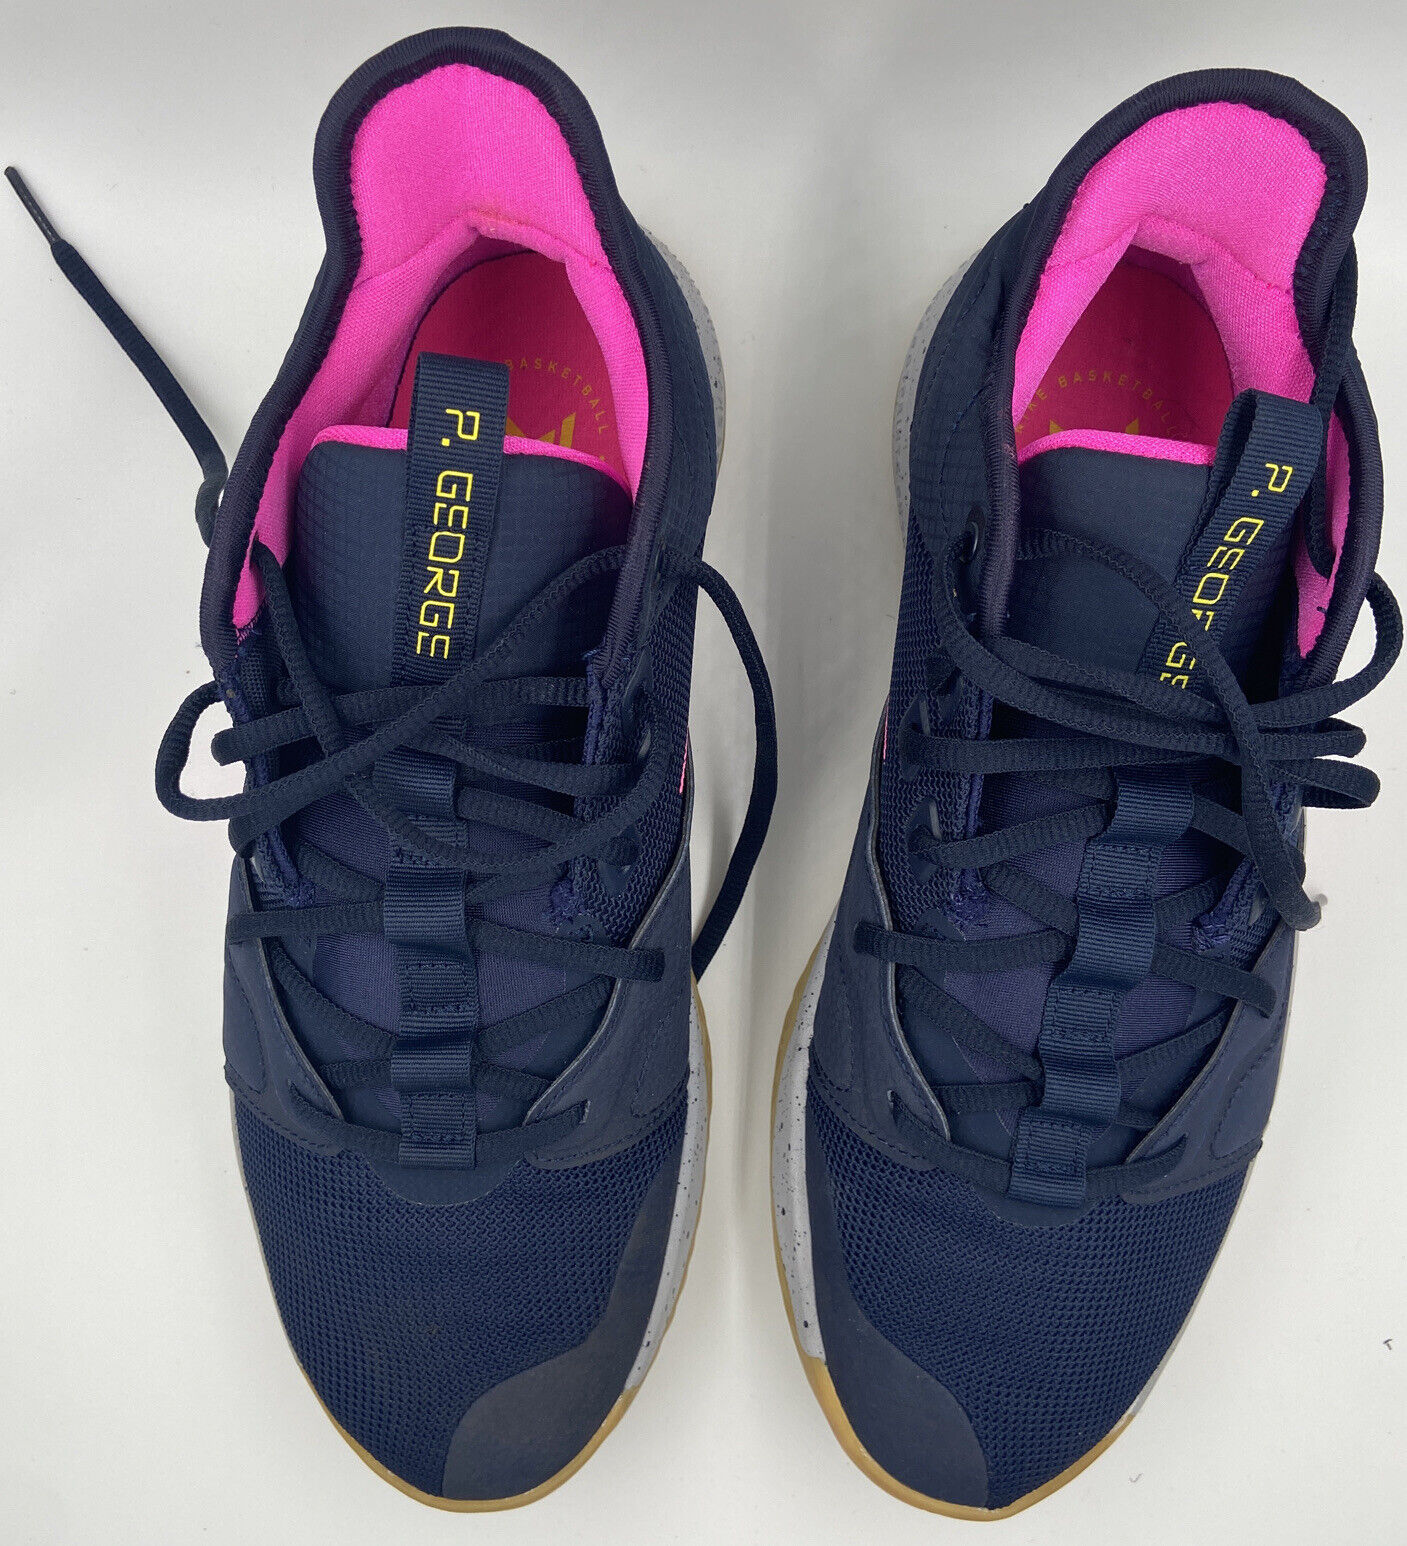 pg 3 navy blue and pink